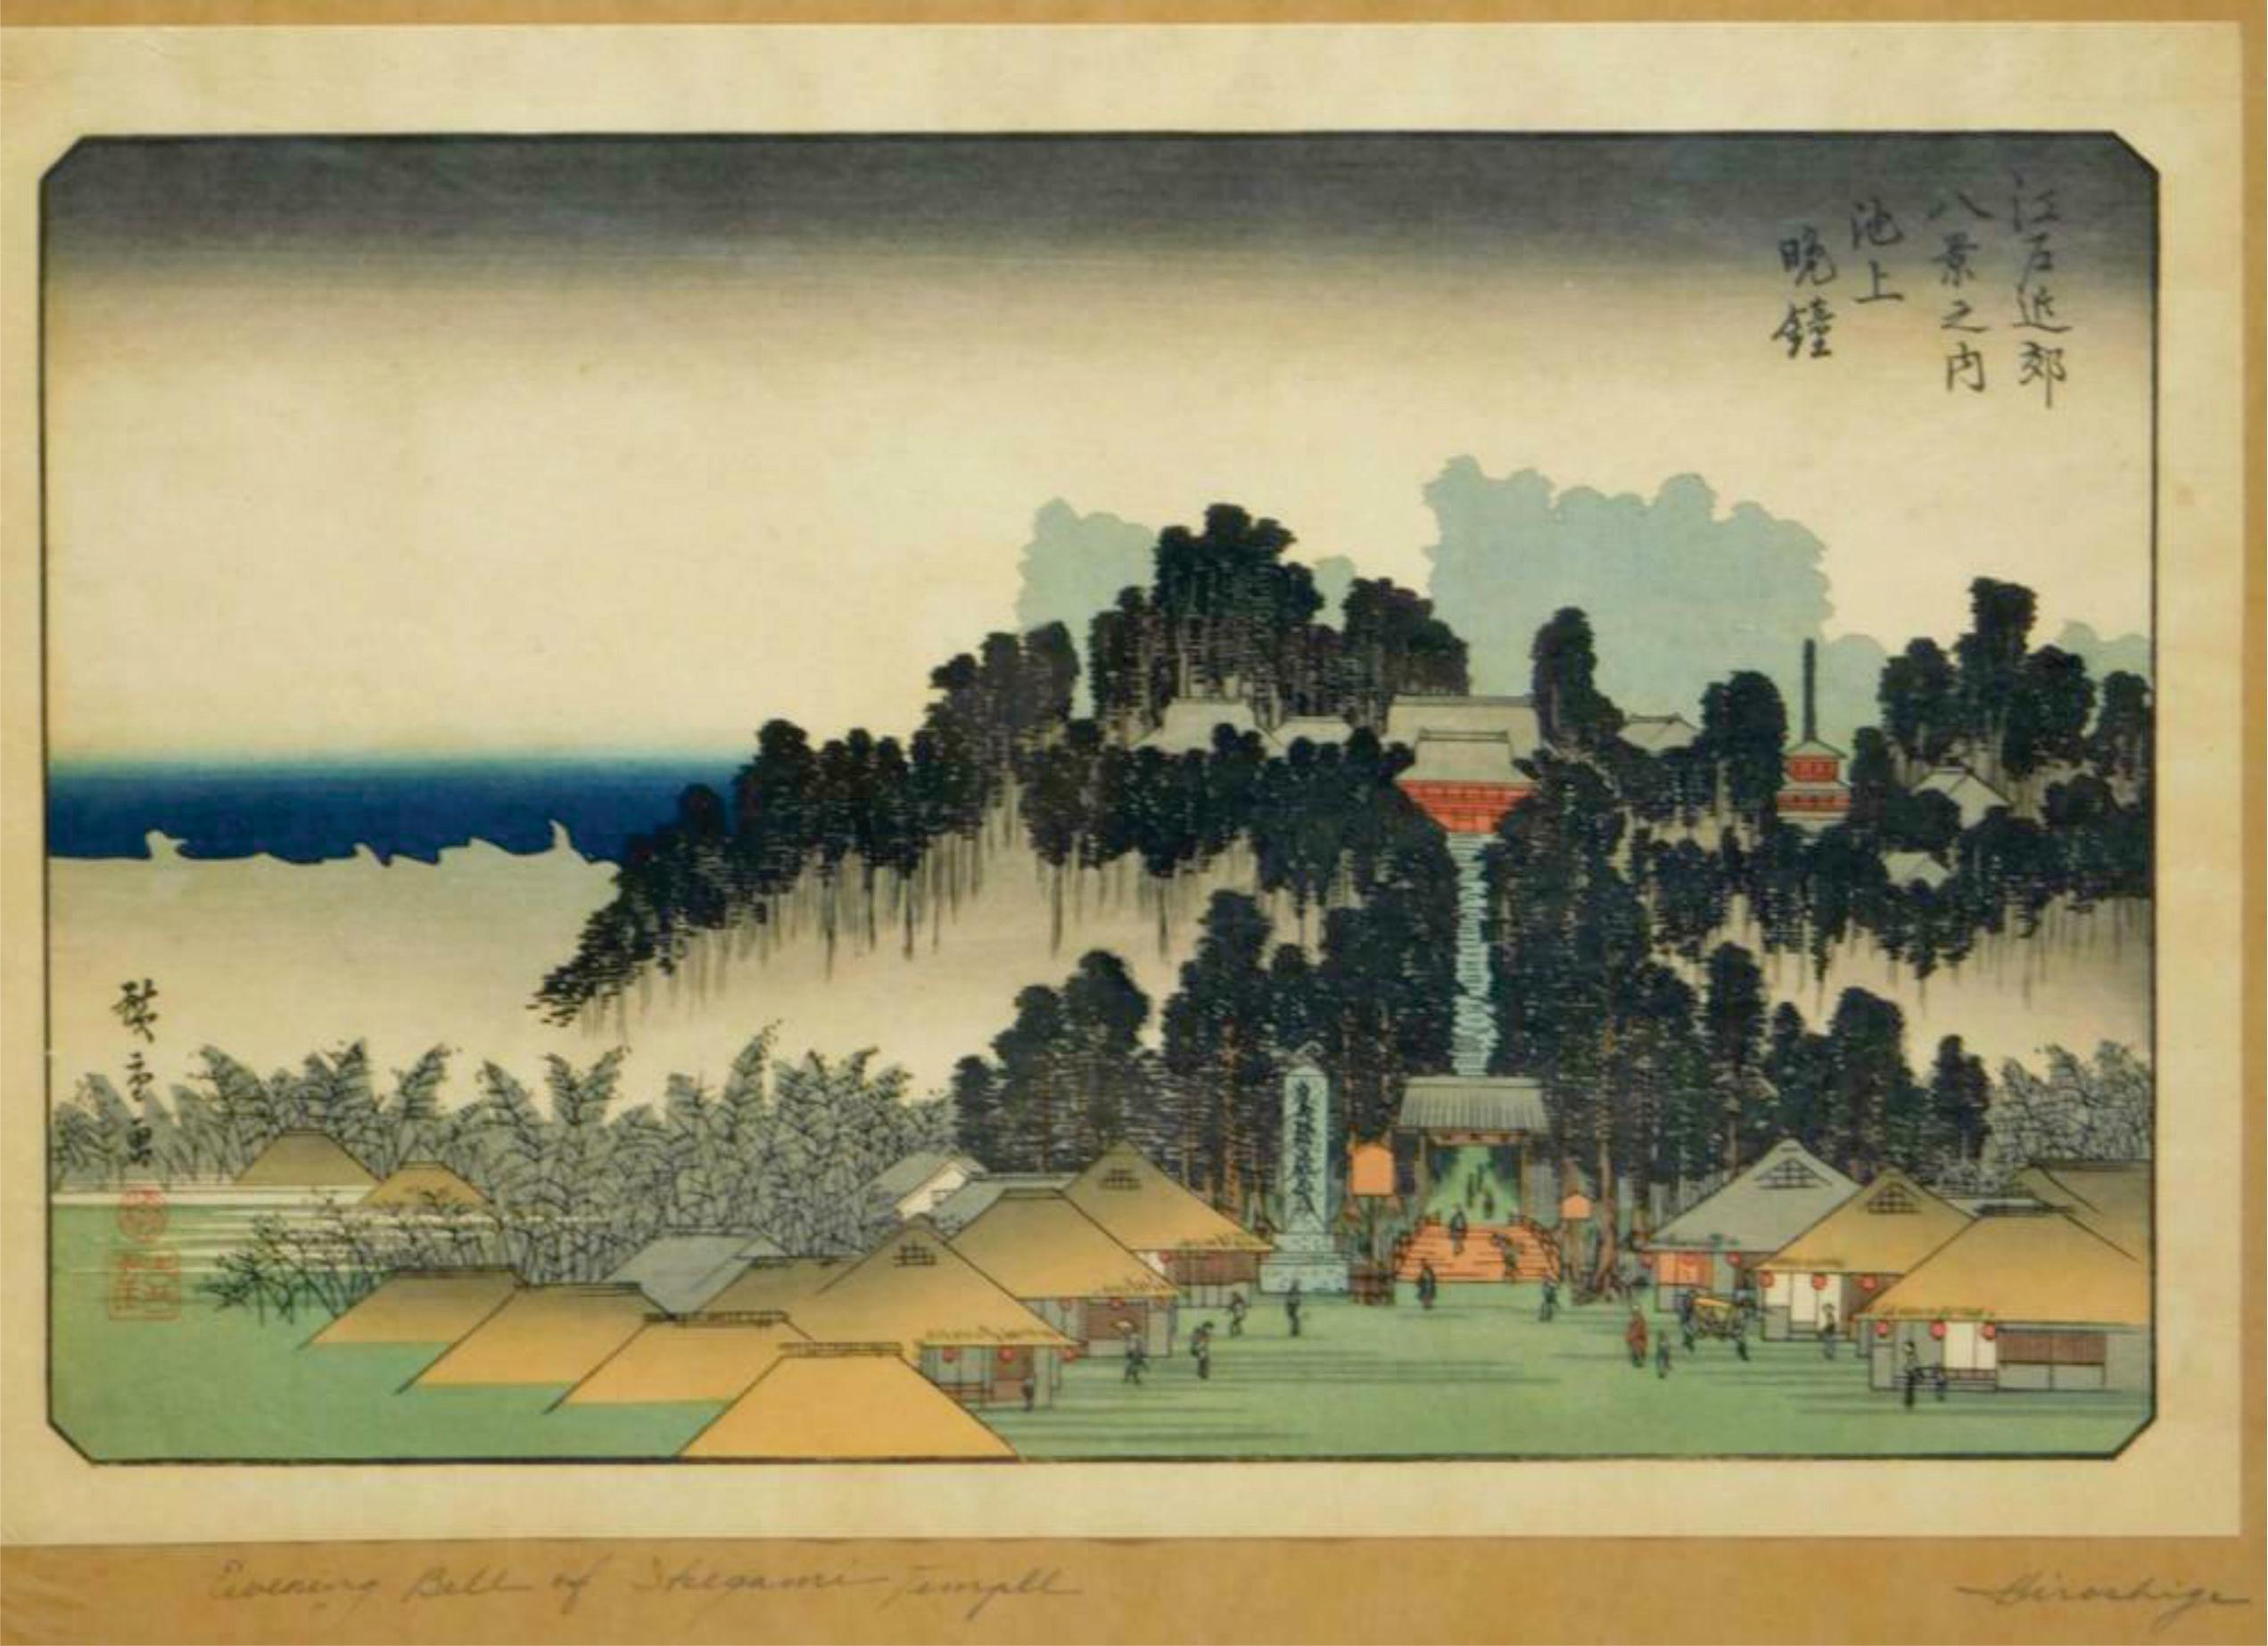 Evening Bell at Ikegami is part of the Eight Views of the Environs of Edo and Man Leading An Ox Between Mountain Slopes.

Artist:
Utagawa Hiroshige is recognized as a master of the ukiyo-e woodblock printing tradition, having created 8,000 prints